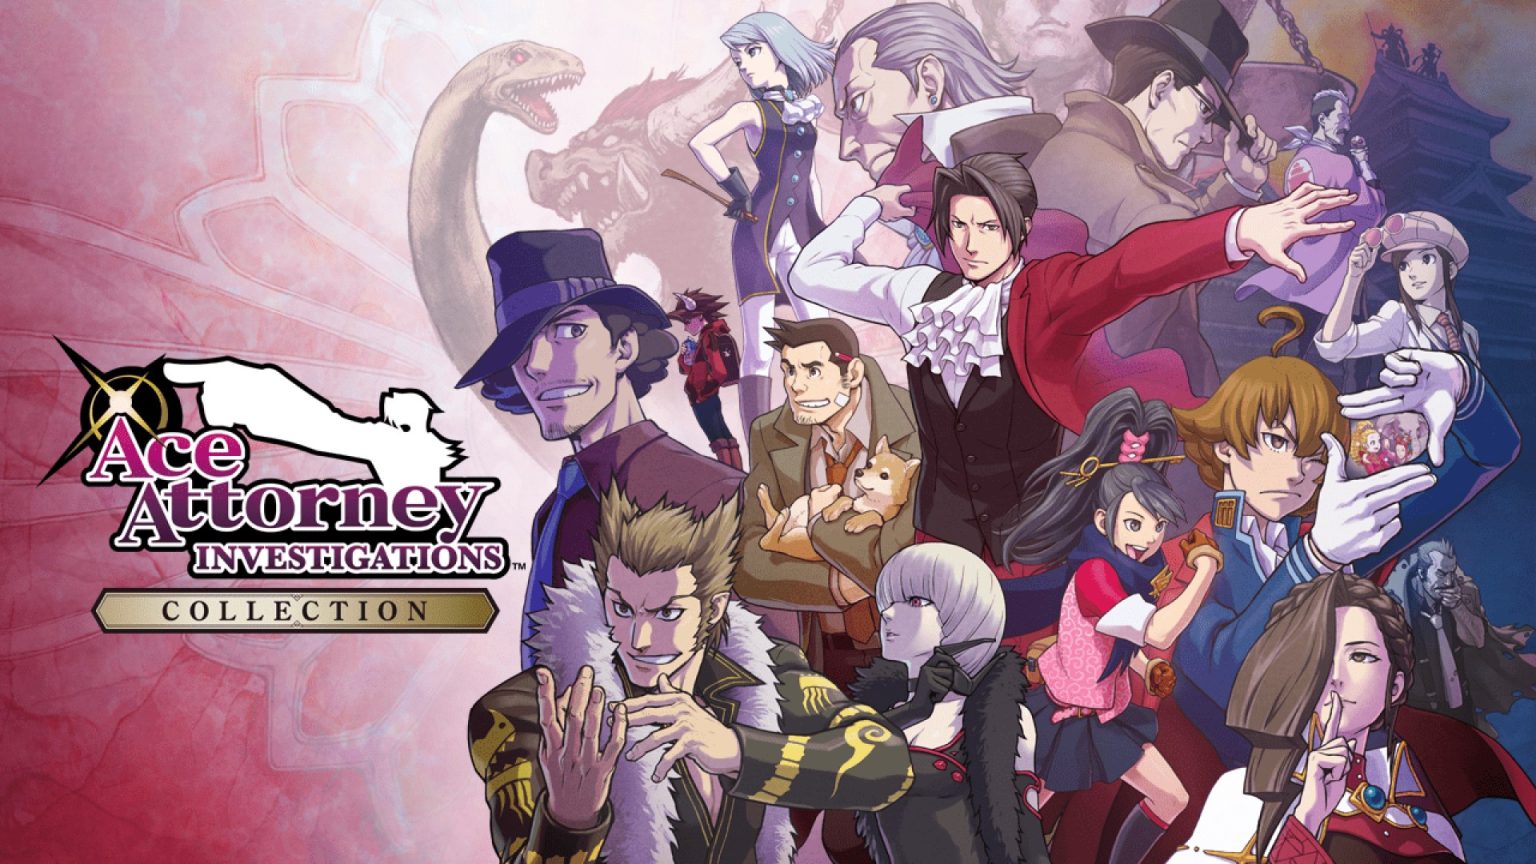 Capcom announces Ace Attorney Investigations Collection for Xbox One, PlayStation 4 and Nintendo Switch